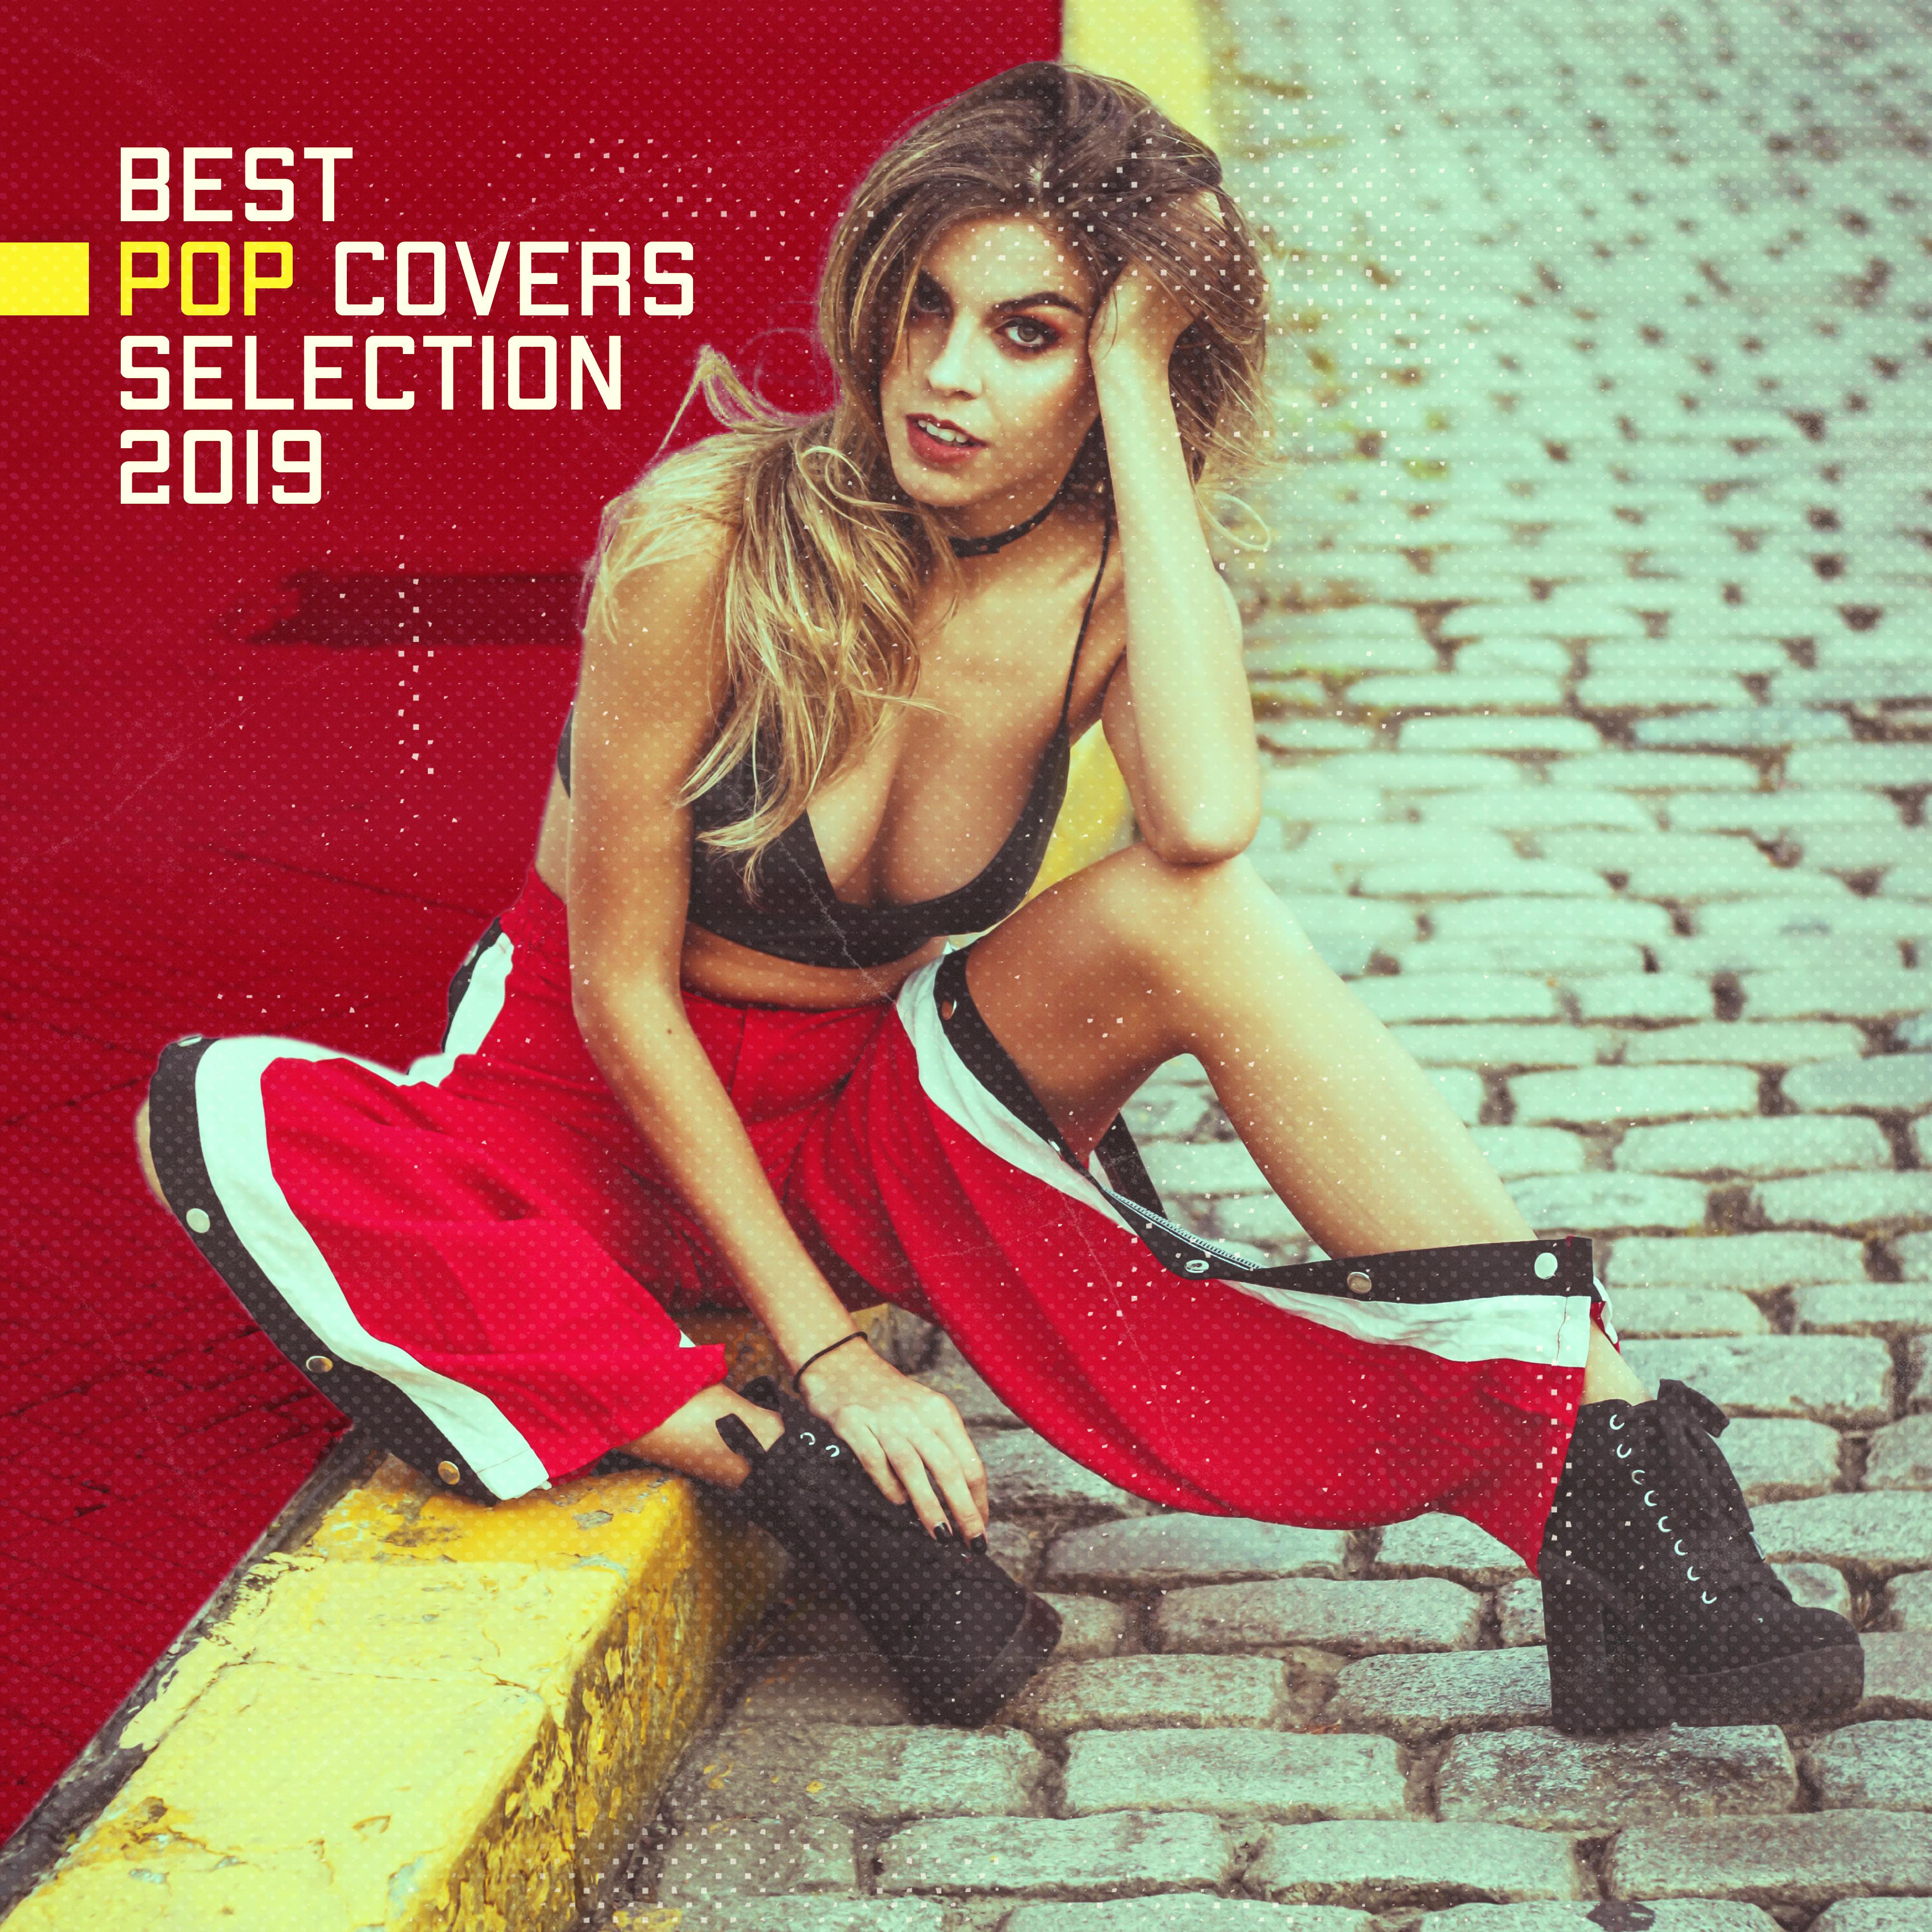 Best Pop Covers Selection 2019  Compilation of Very Popular Tracks Played on Piano, Violin  Guitar